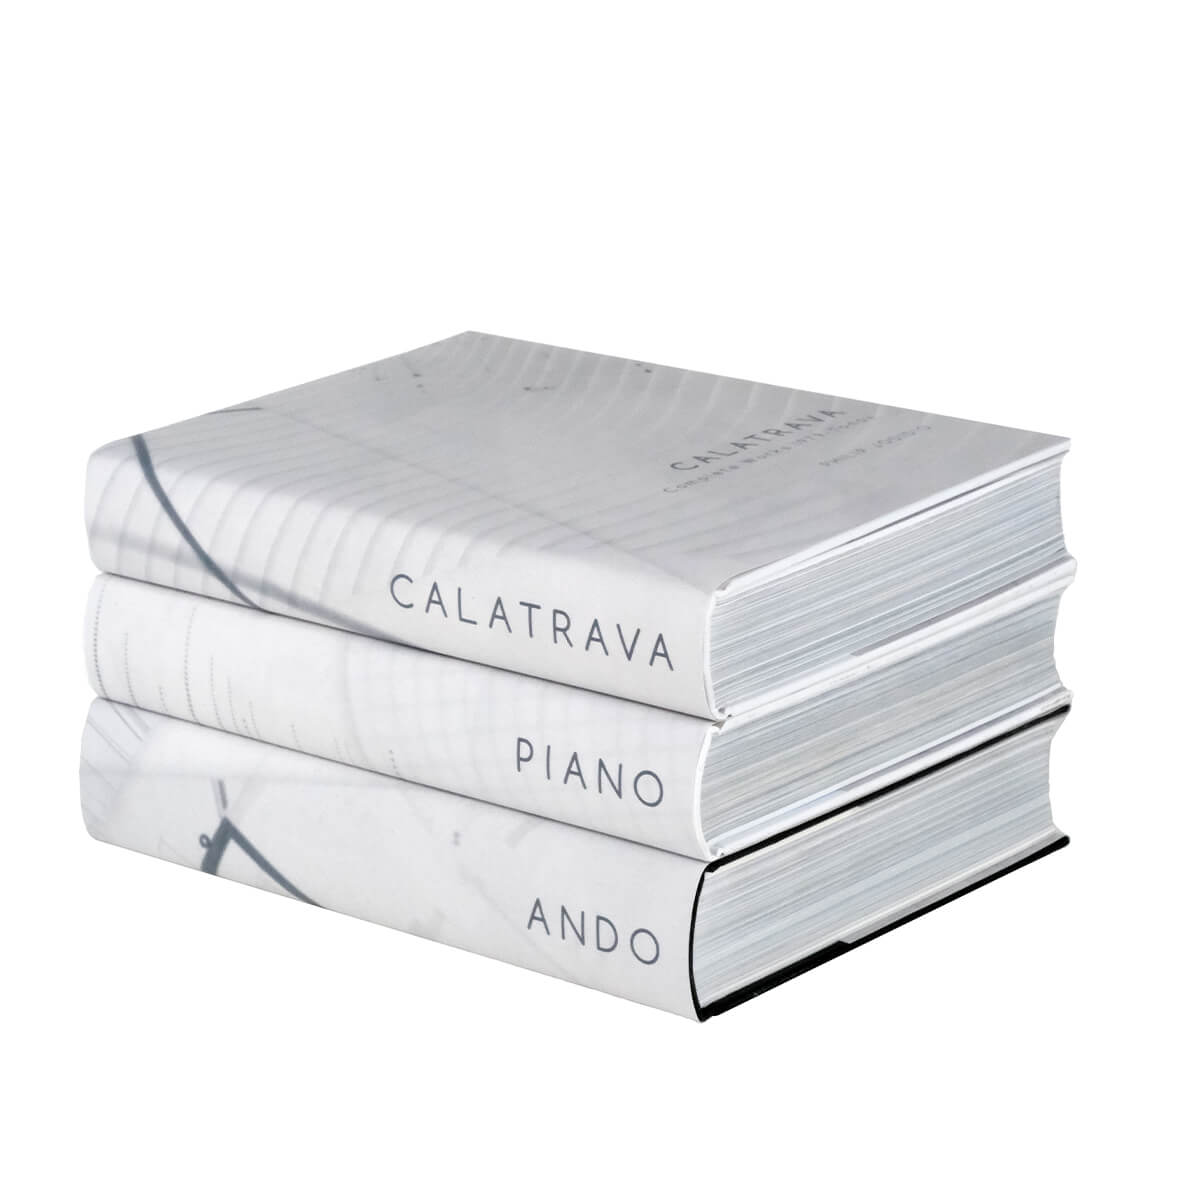 Within this remarkable custom book set, you will delve into the awe-inspiring world of architecture, immersing yourself in the works of visionaries such as Santiago Calatrava, Tadao Ando, and Renzo Piano.  Makes a great gift set for architectural lovers!